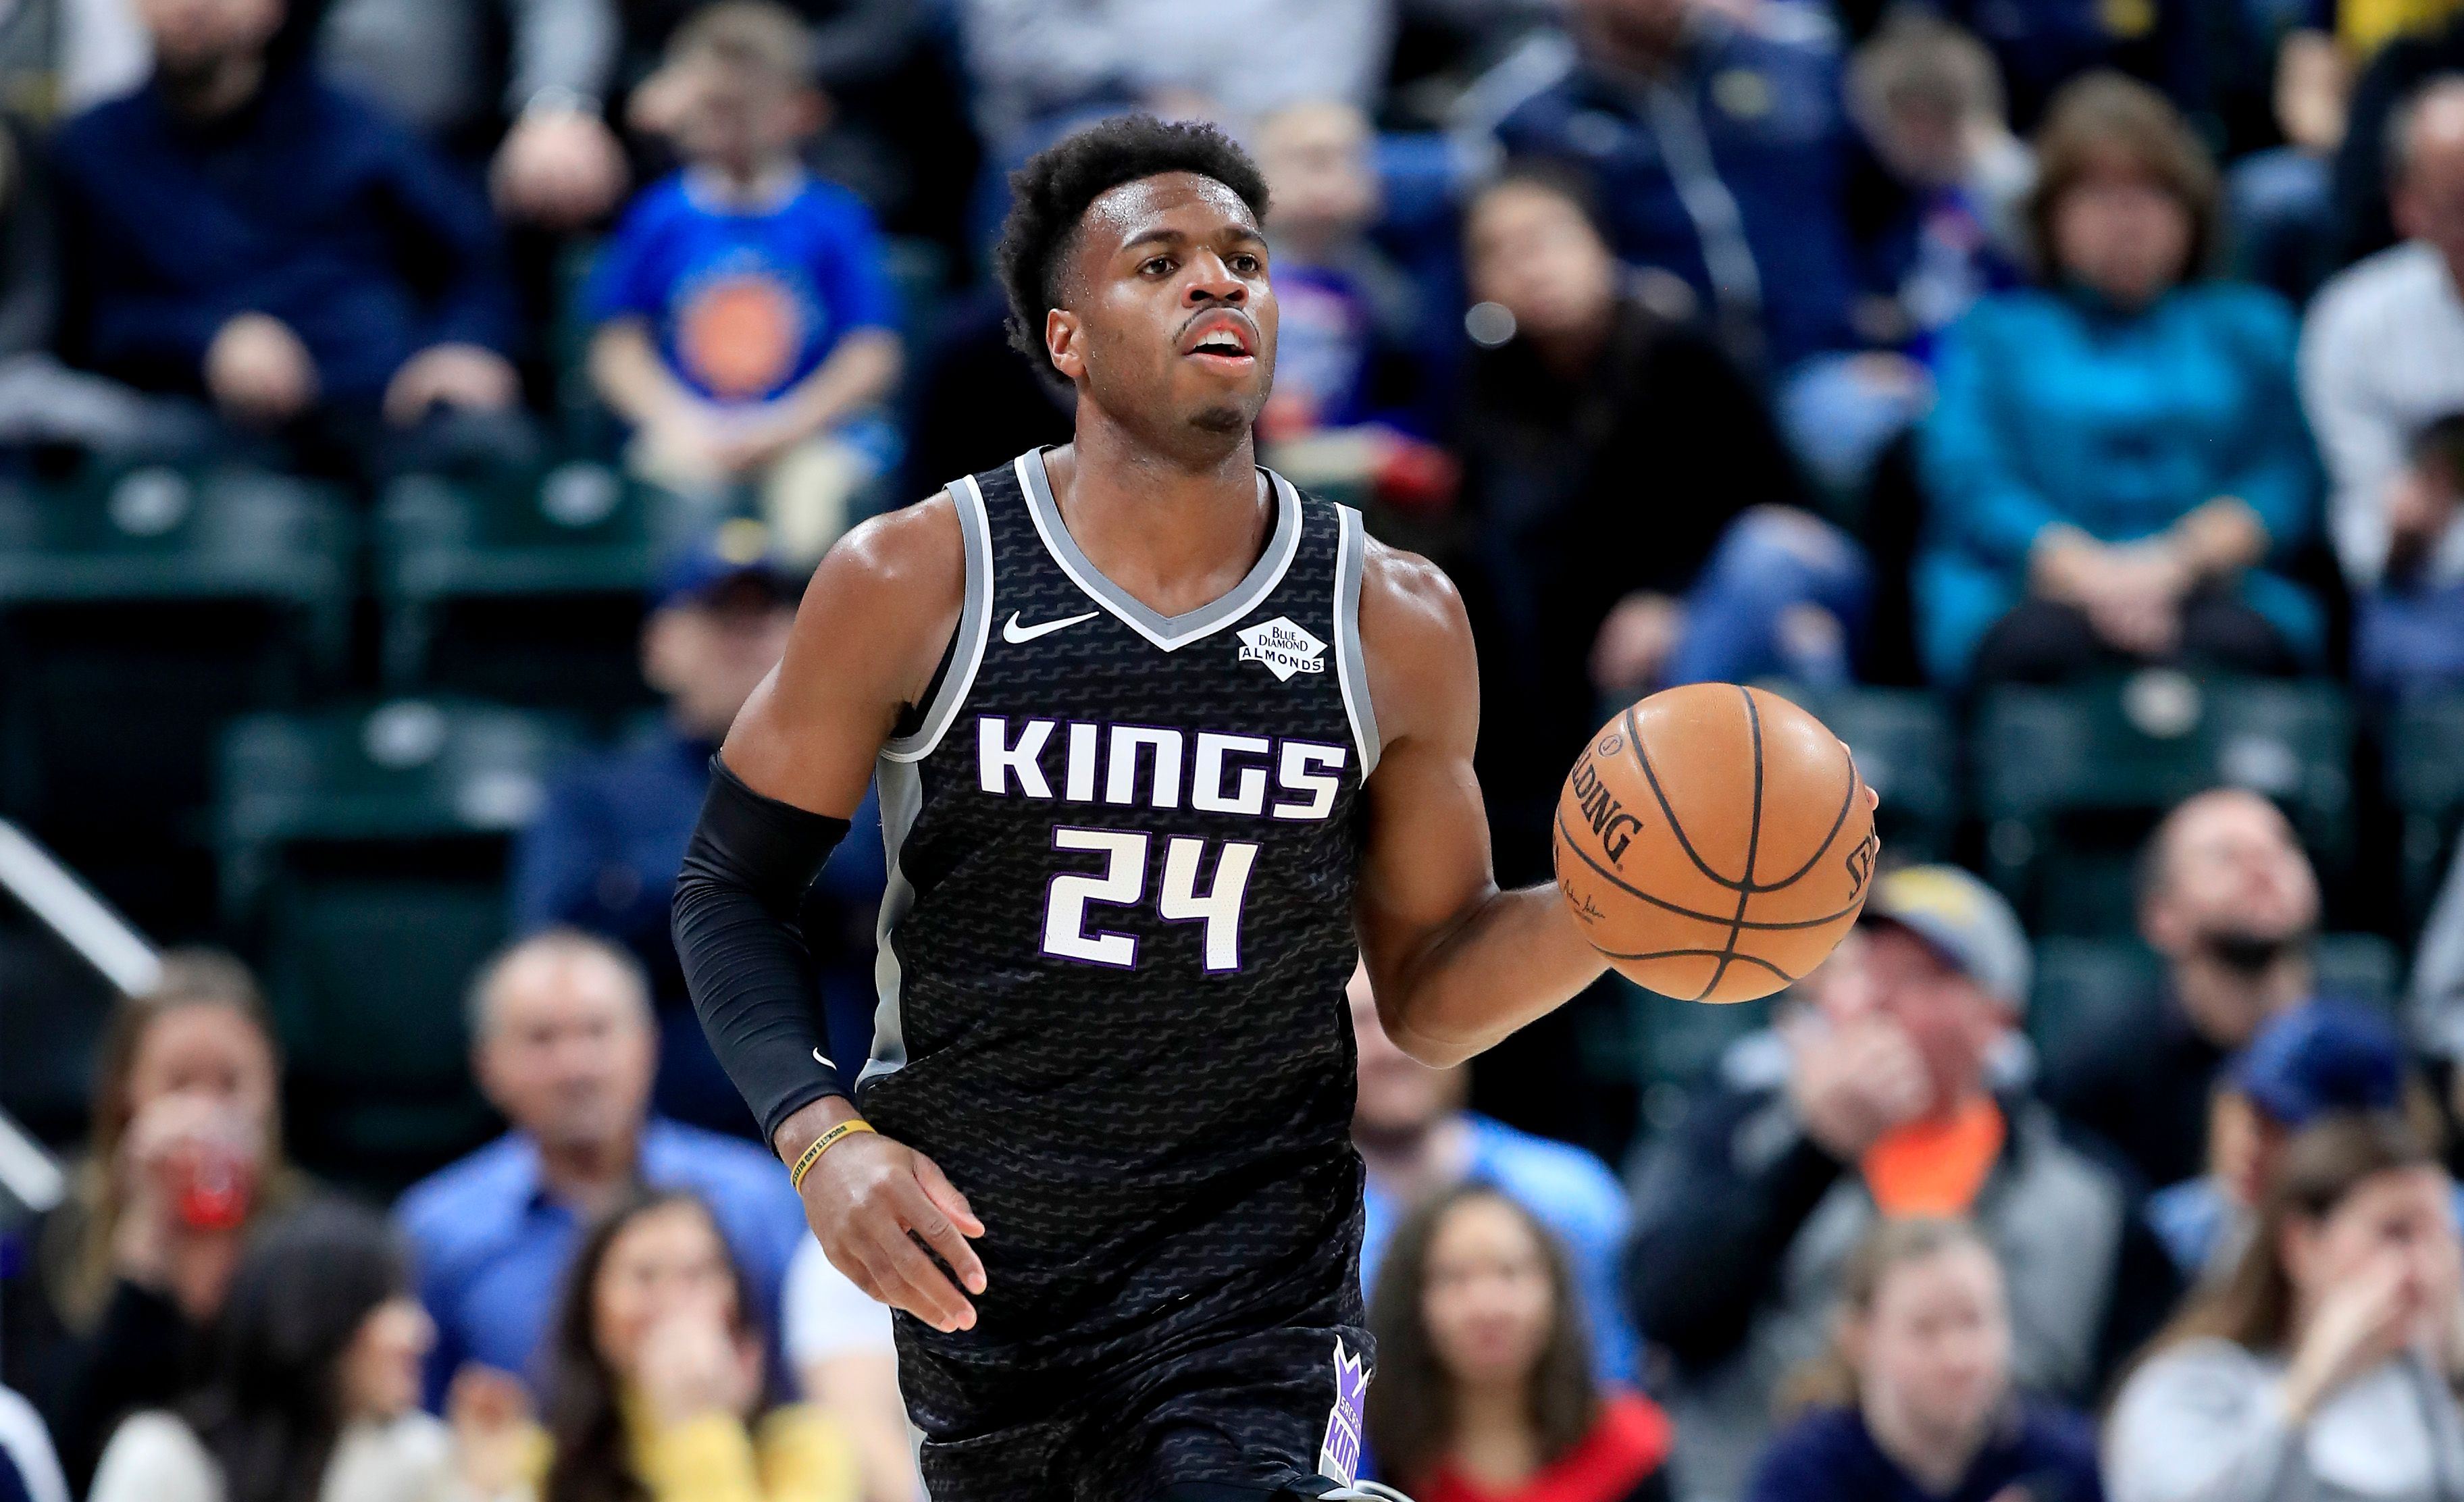 Buddy Hield making plays for the Kings